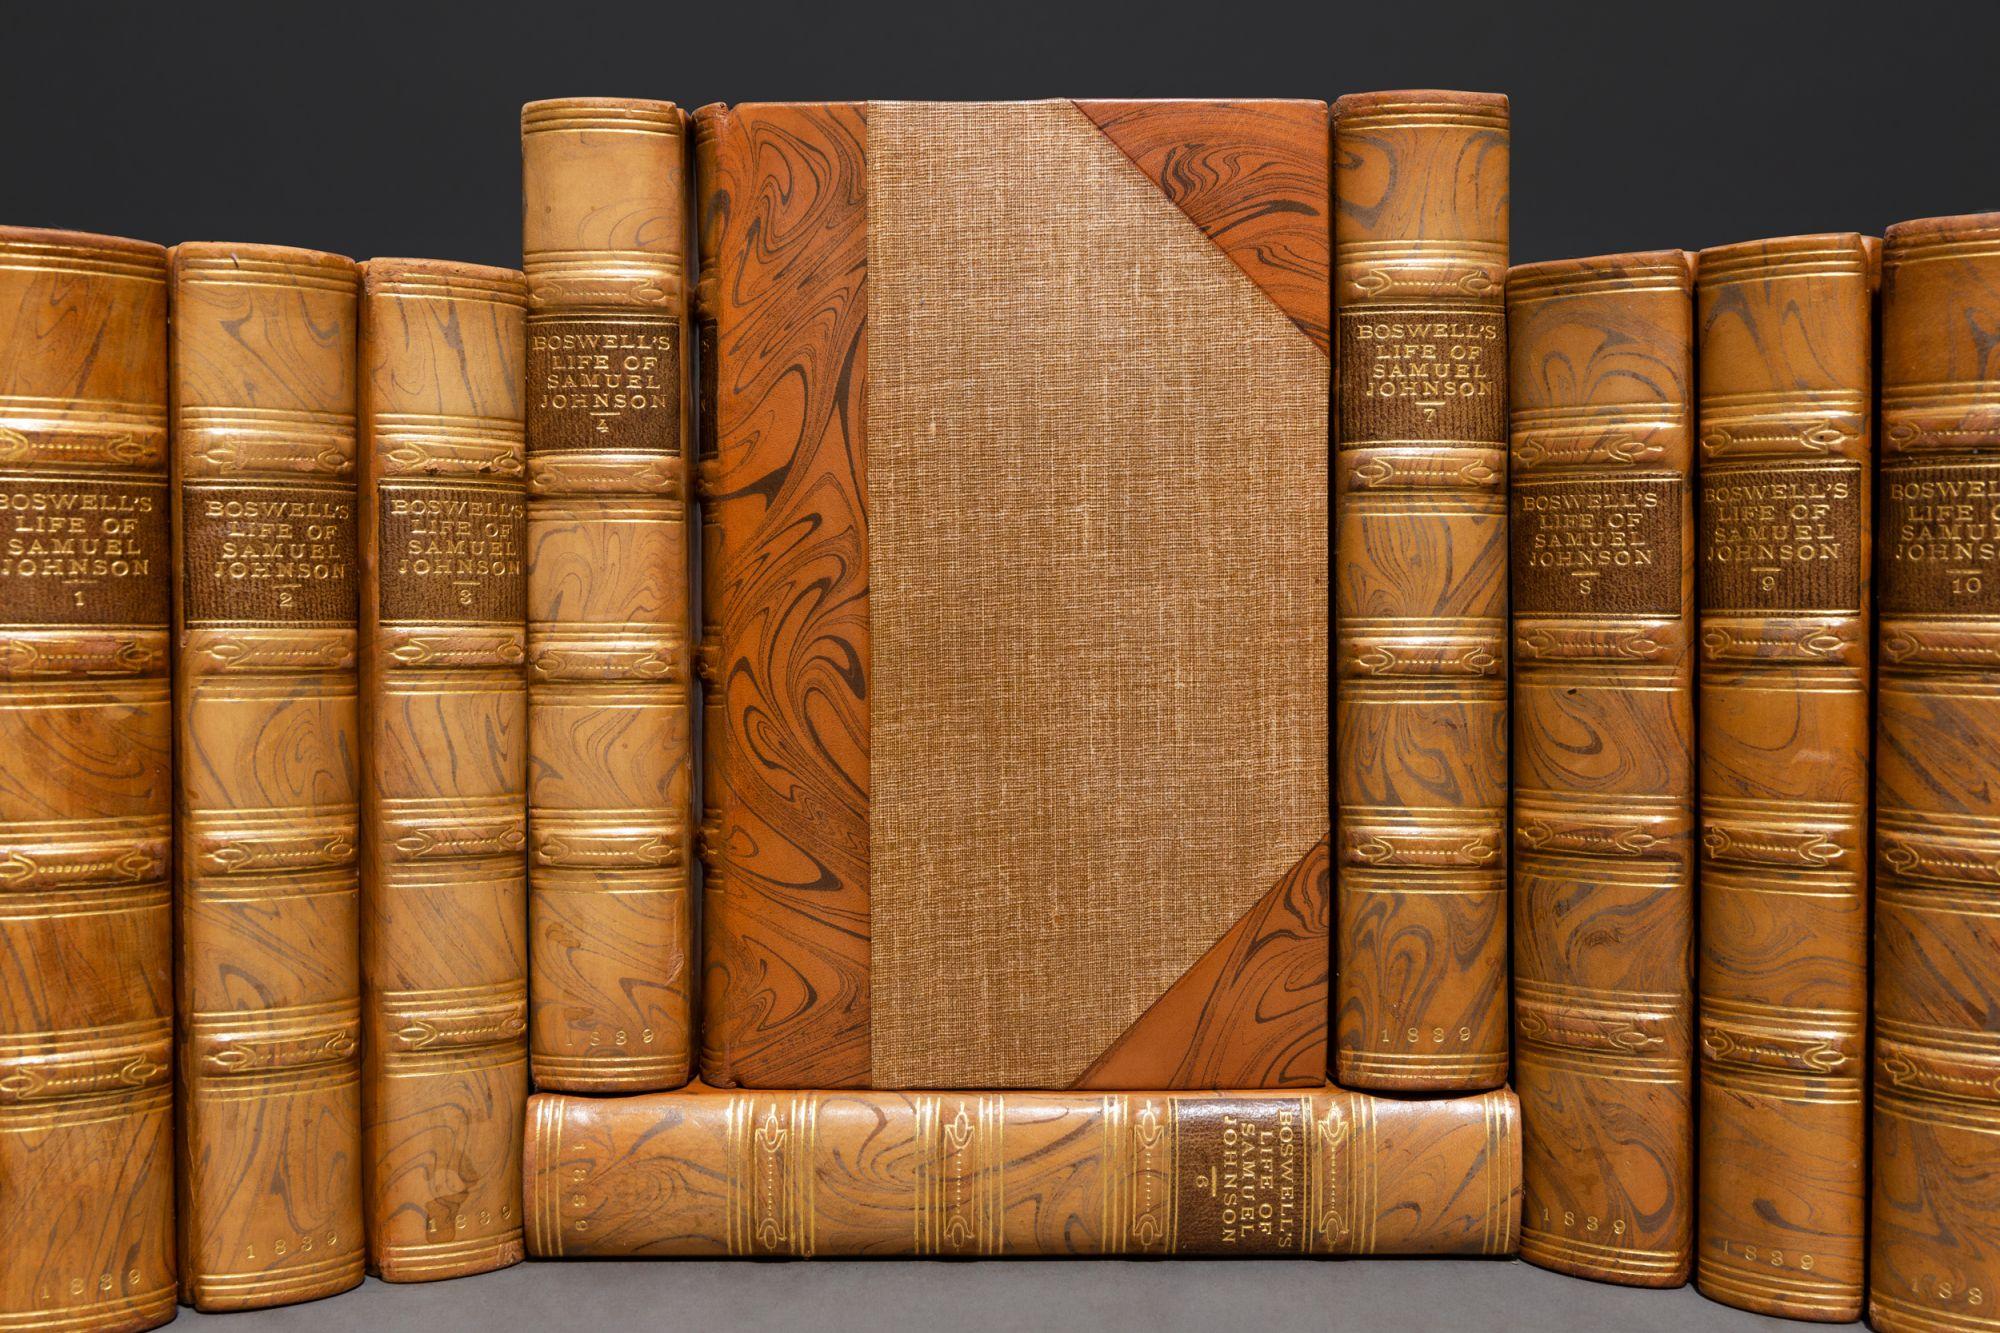 10 Volumes. James Boswell. The Life of Samuel Johnson. With a Journal of His Tour To The Hebrides. With numerous additions & notes by the Right Hon. John Wilson Croker and two supplementary volumes of Johnsoniana. Upwards to fifty engraved